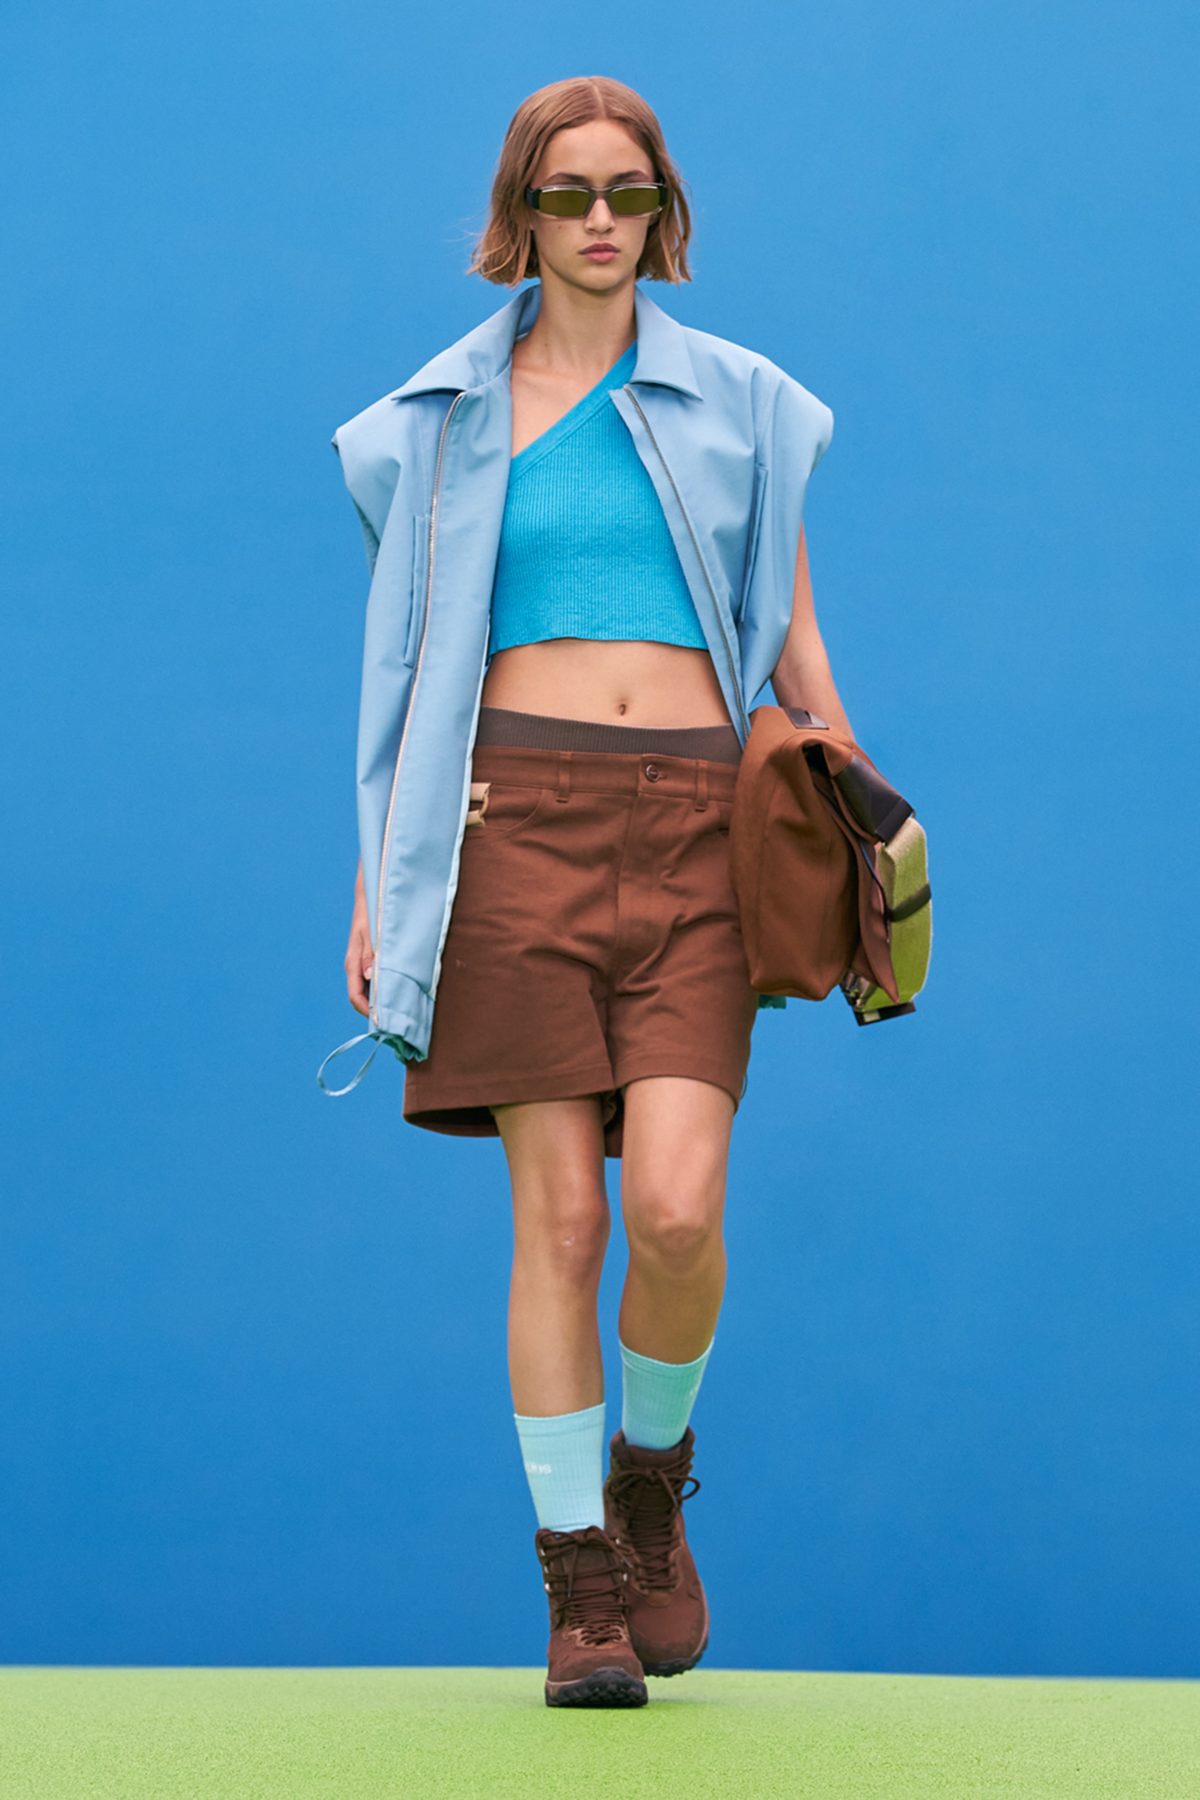 Jacquemus Spring 2021 Featured Plus Size Models In Minis & Crop Tops